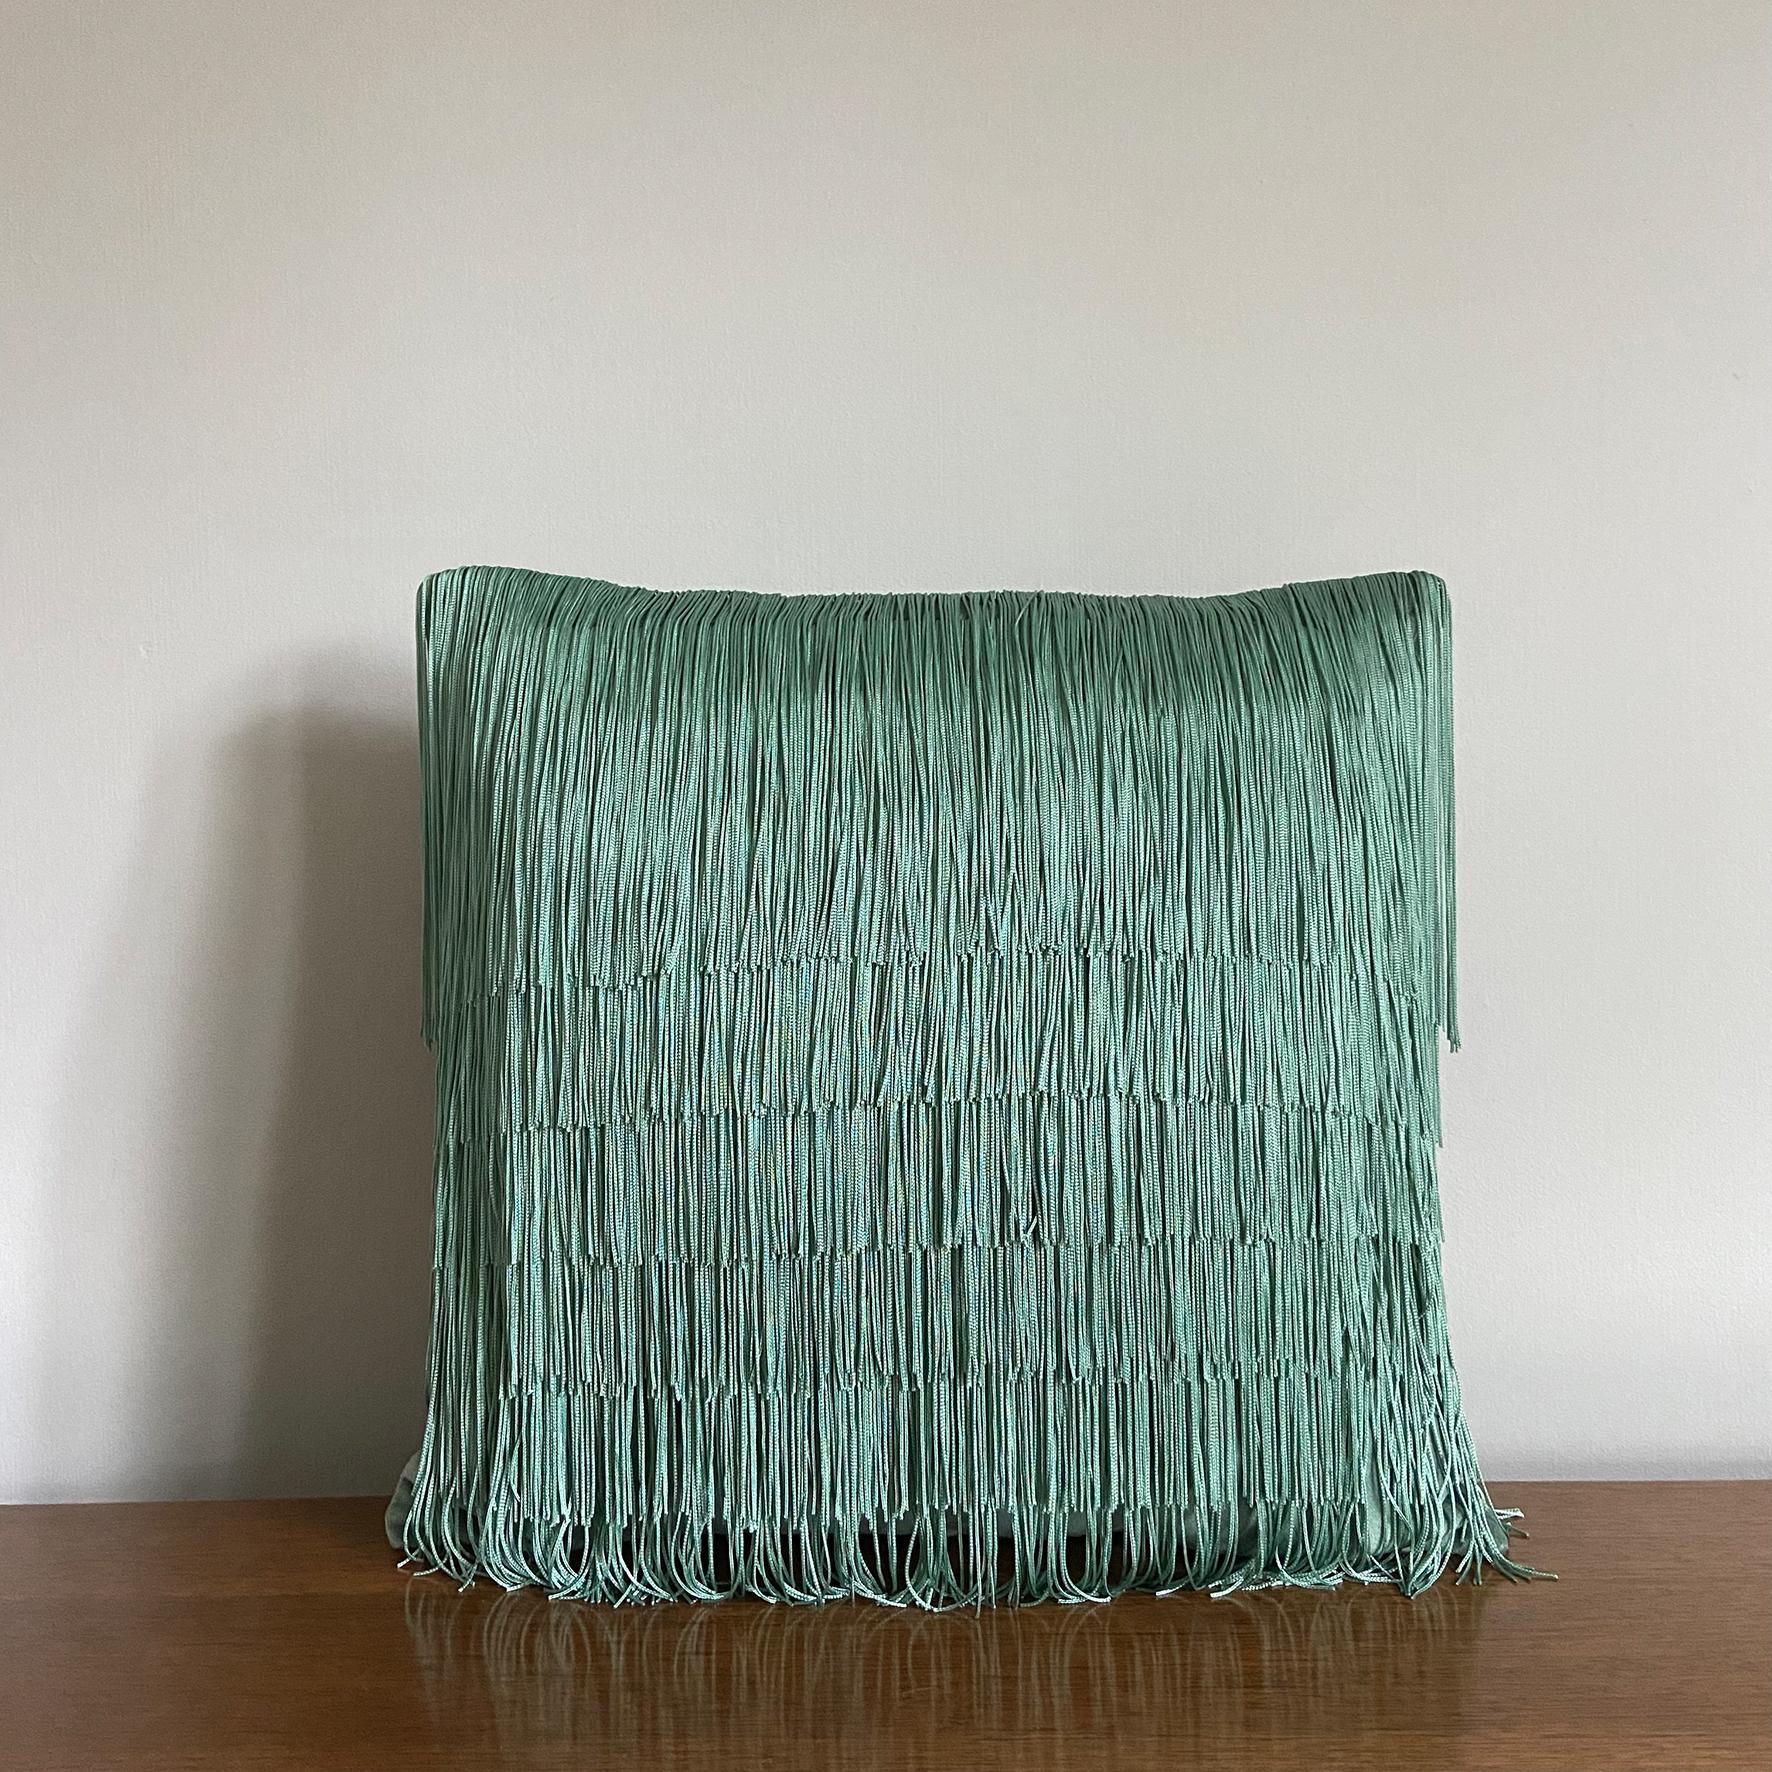 In a jewel-like jade colourway, our signature velvet tassel cushion will make the ultimate decorative statement in your home. Whether you’re a maximalist adding to your many layers of décor or a minimalist wanting to make an impact this cushion does